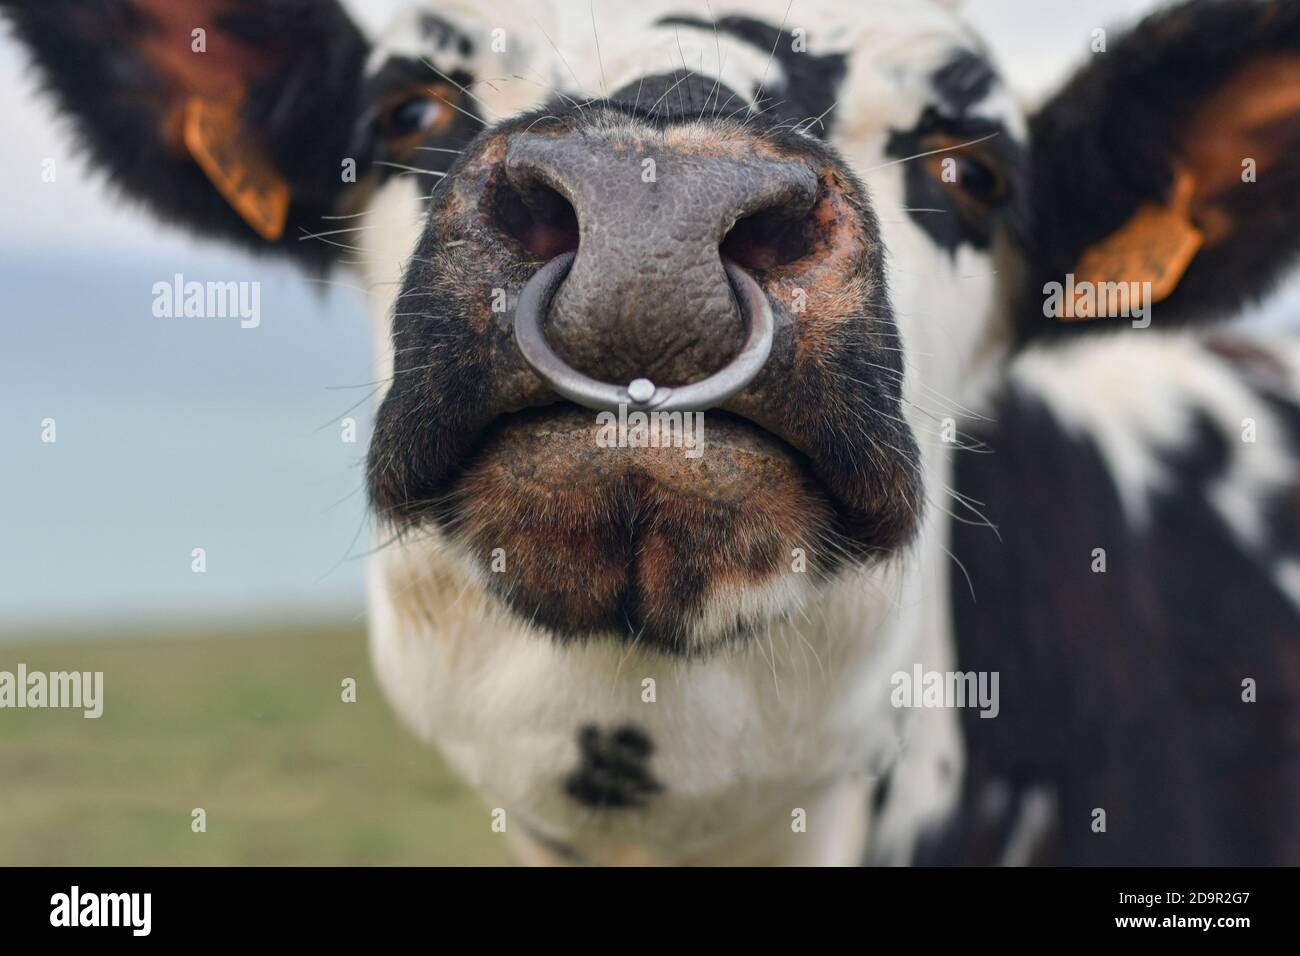 Spotted cow with a pierced nose in Normandy Stock Photo